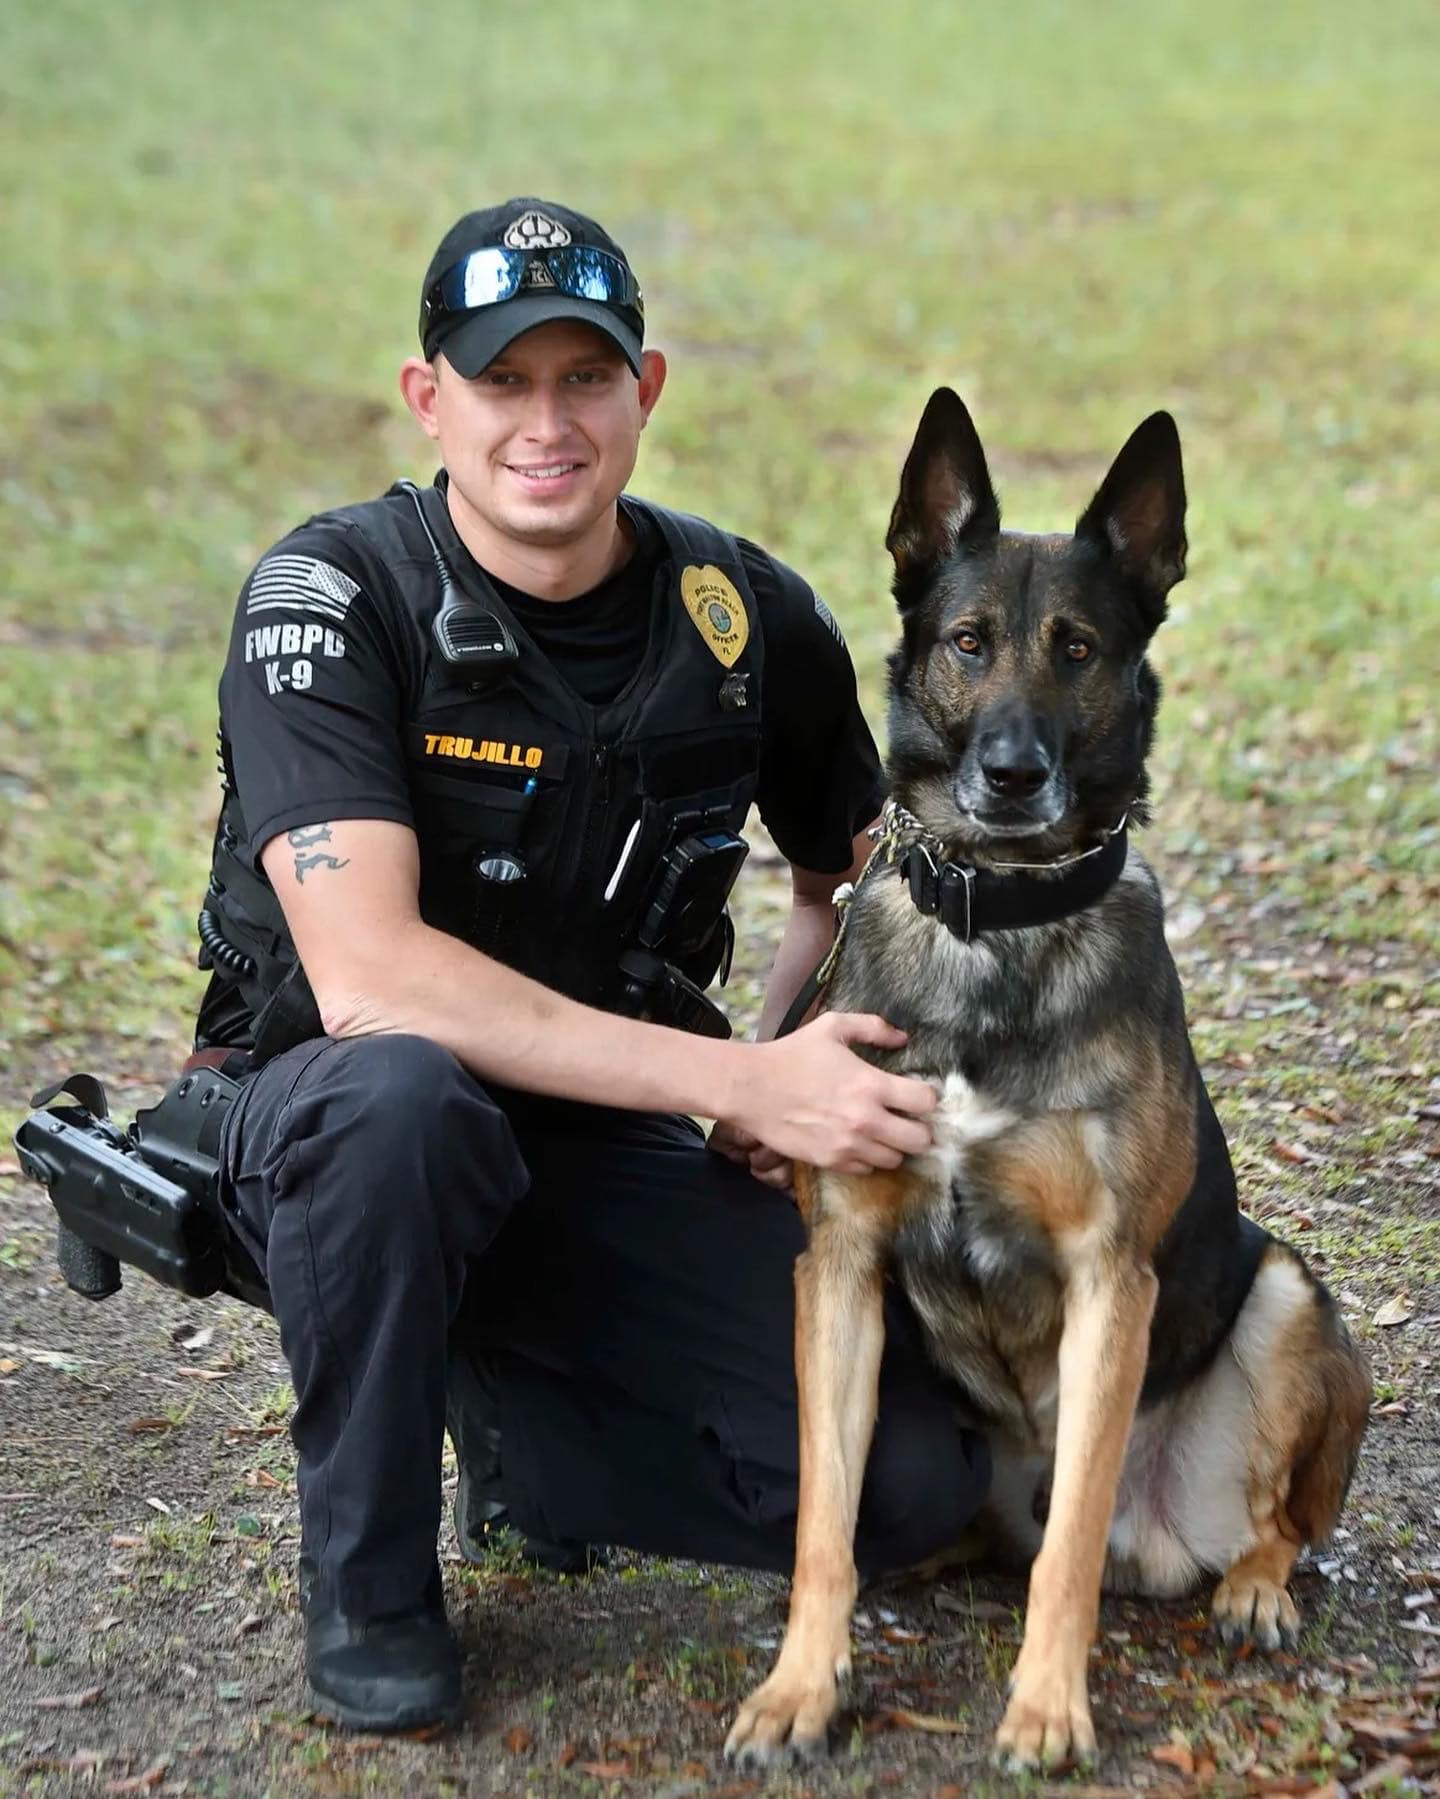 police officer posing with police dog